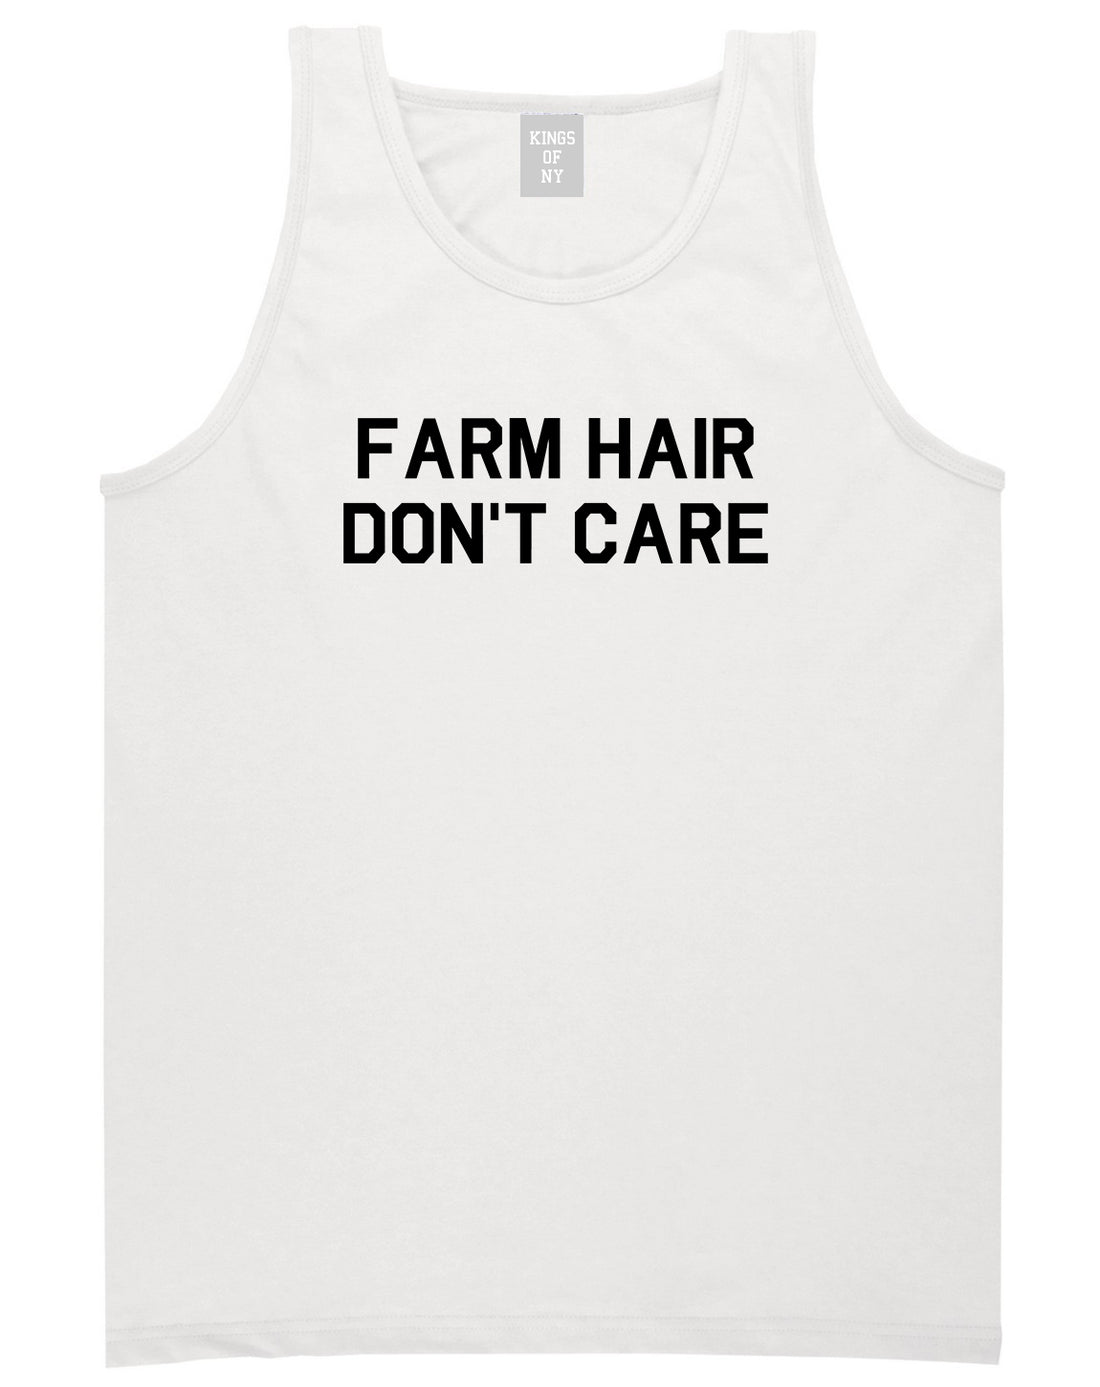 Farm Hair Dont Care Mens White Tank Top Shirt by KINGS OF NY